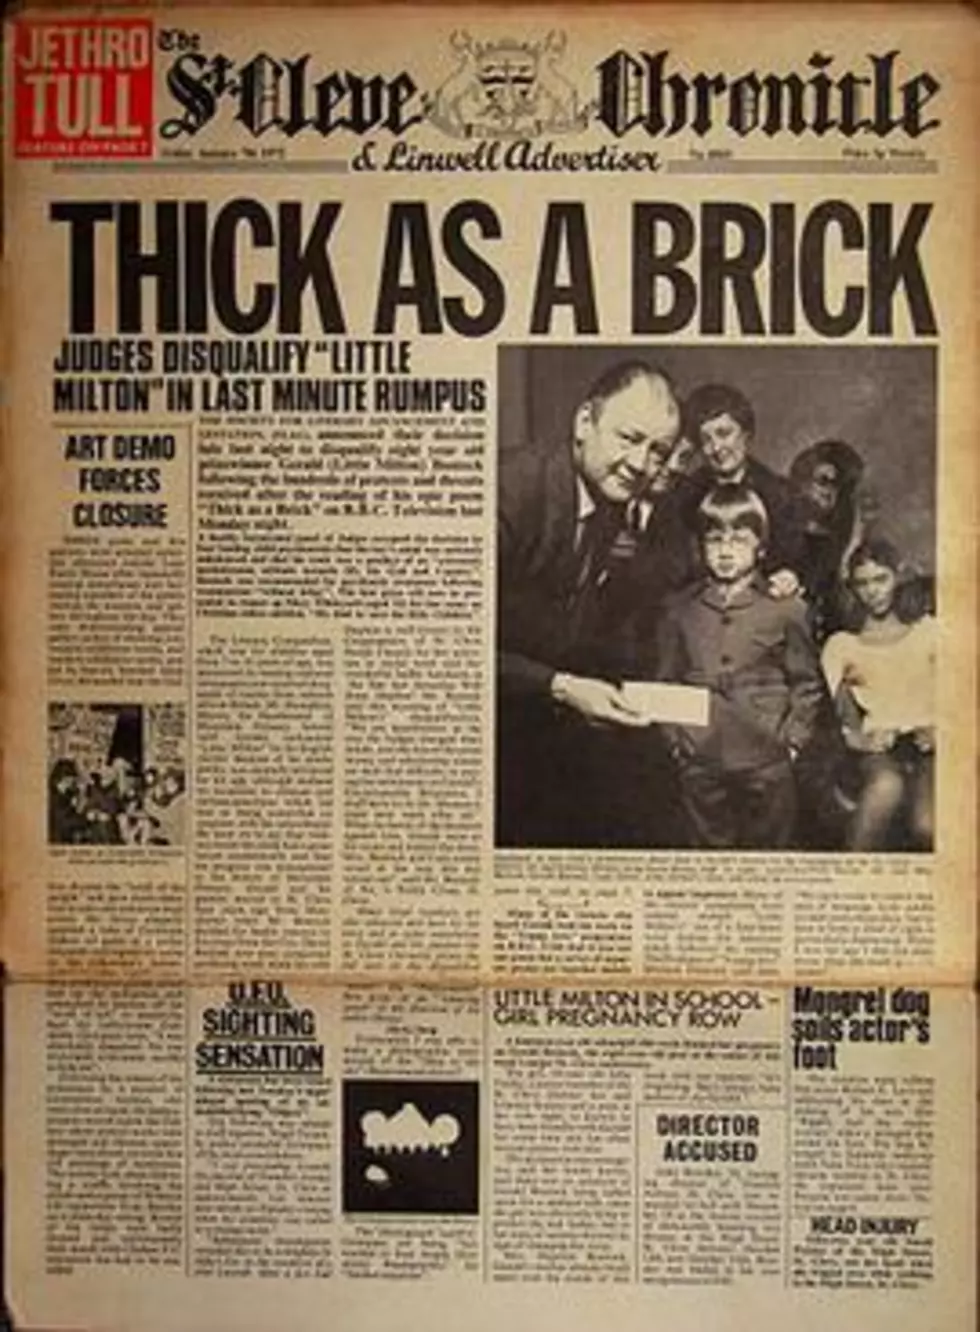 WPDH Album of the Week: Jethro Tull &#8216;Thick as a Brick&#8217;